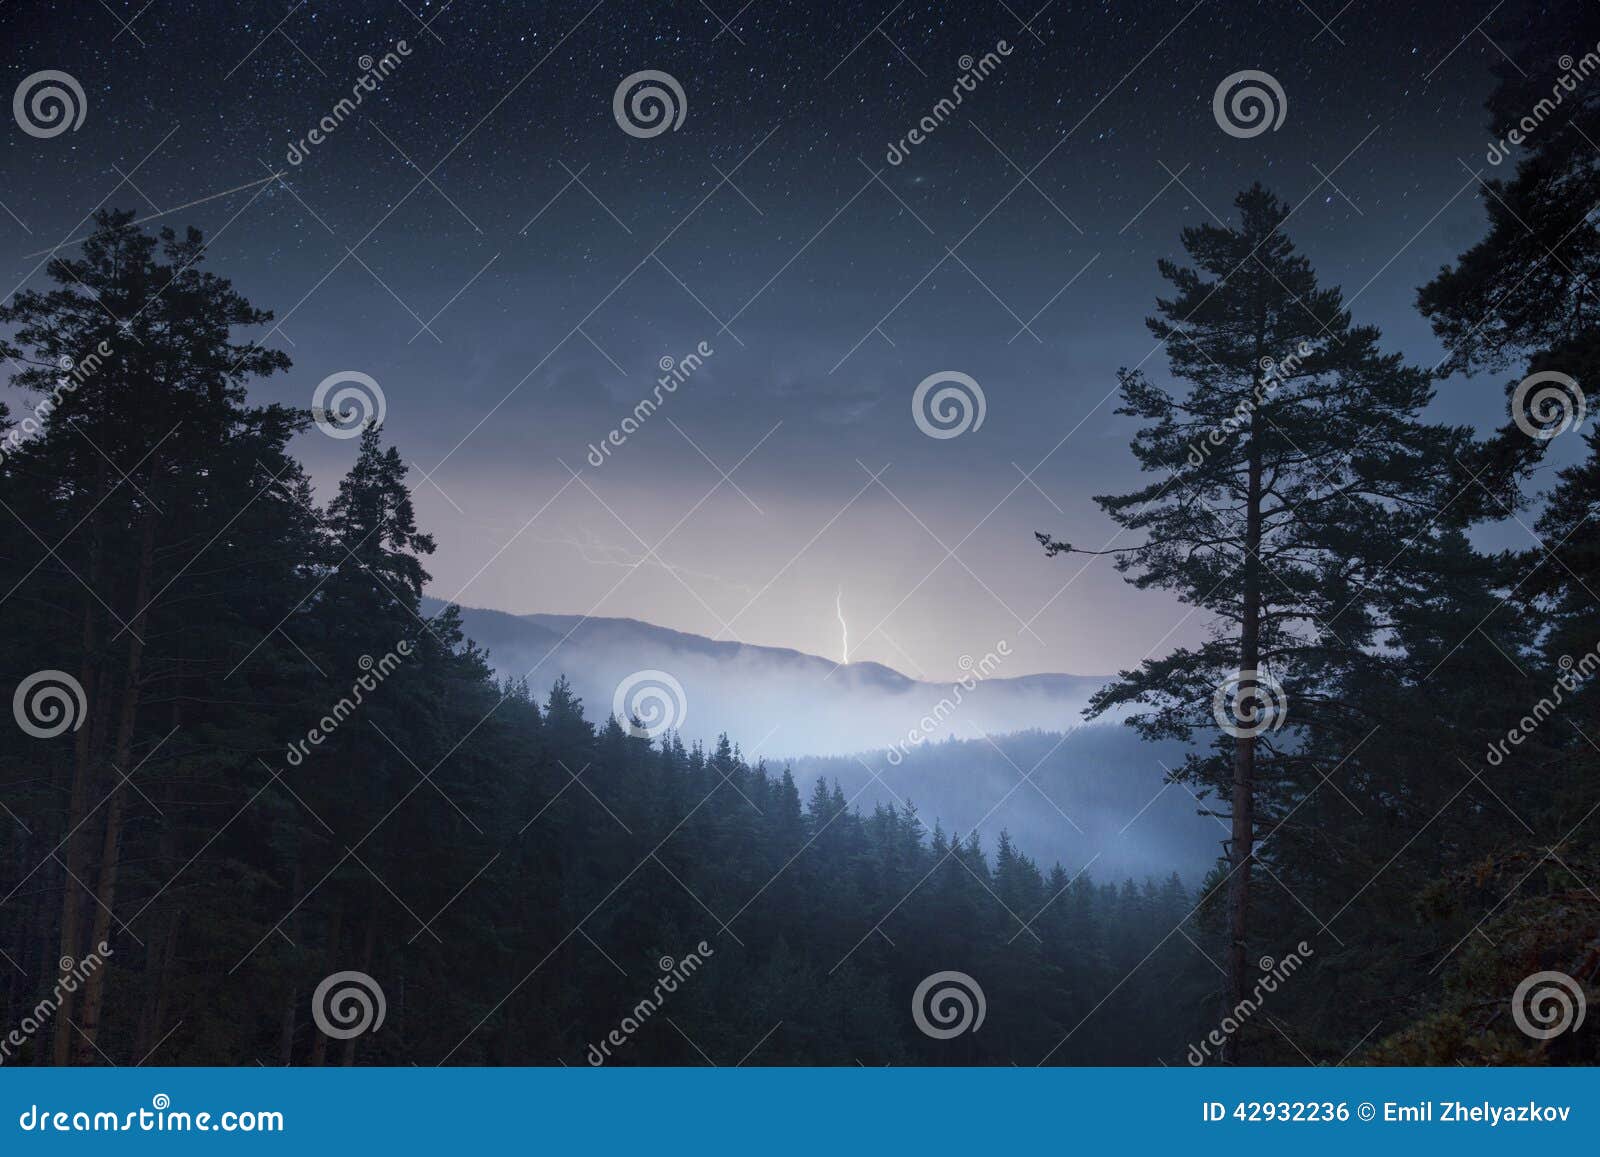 night pine trees forest & mountain and thunder